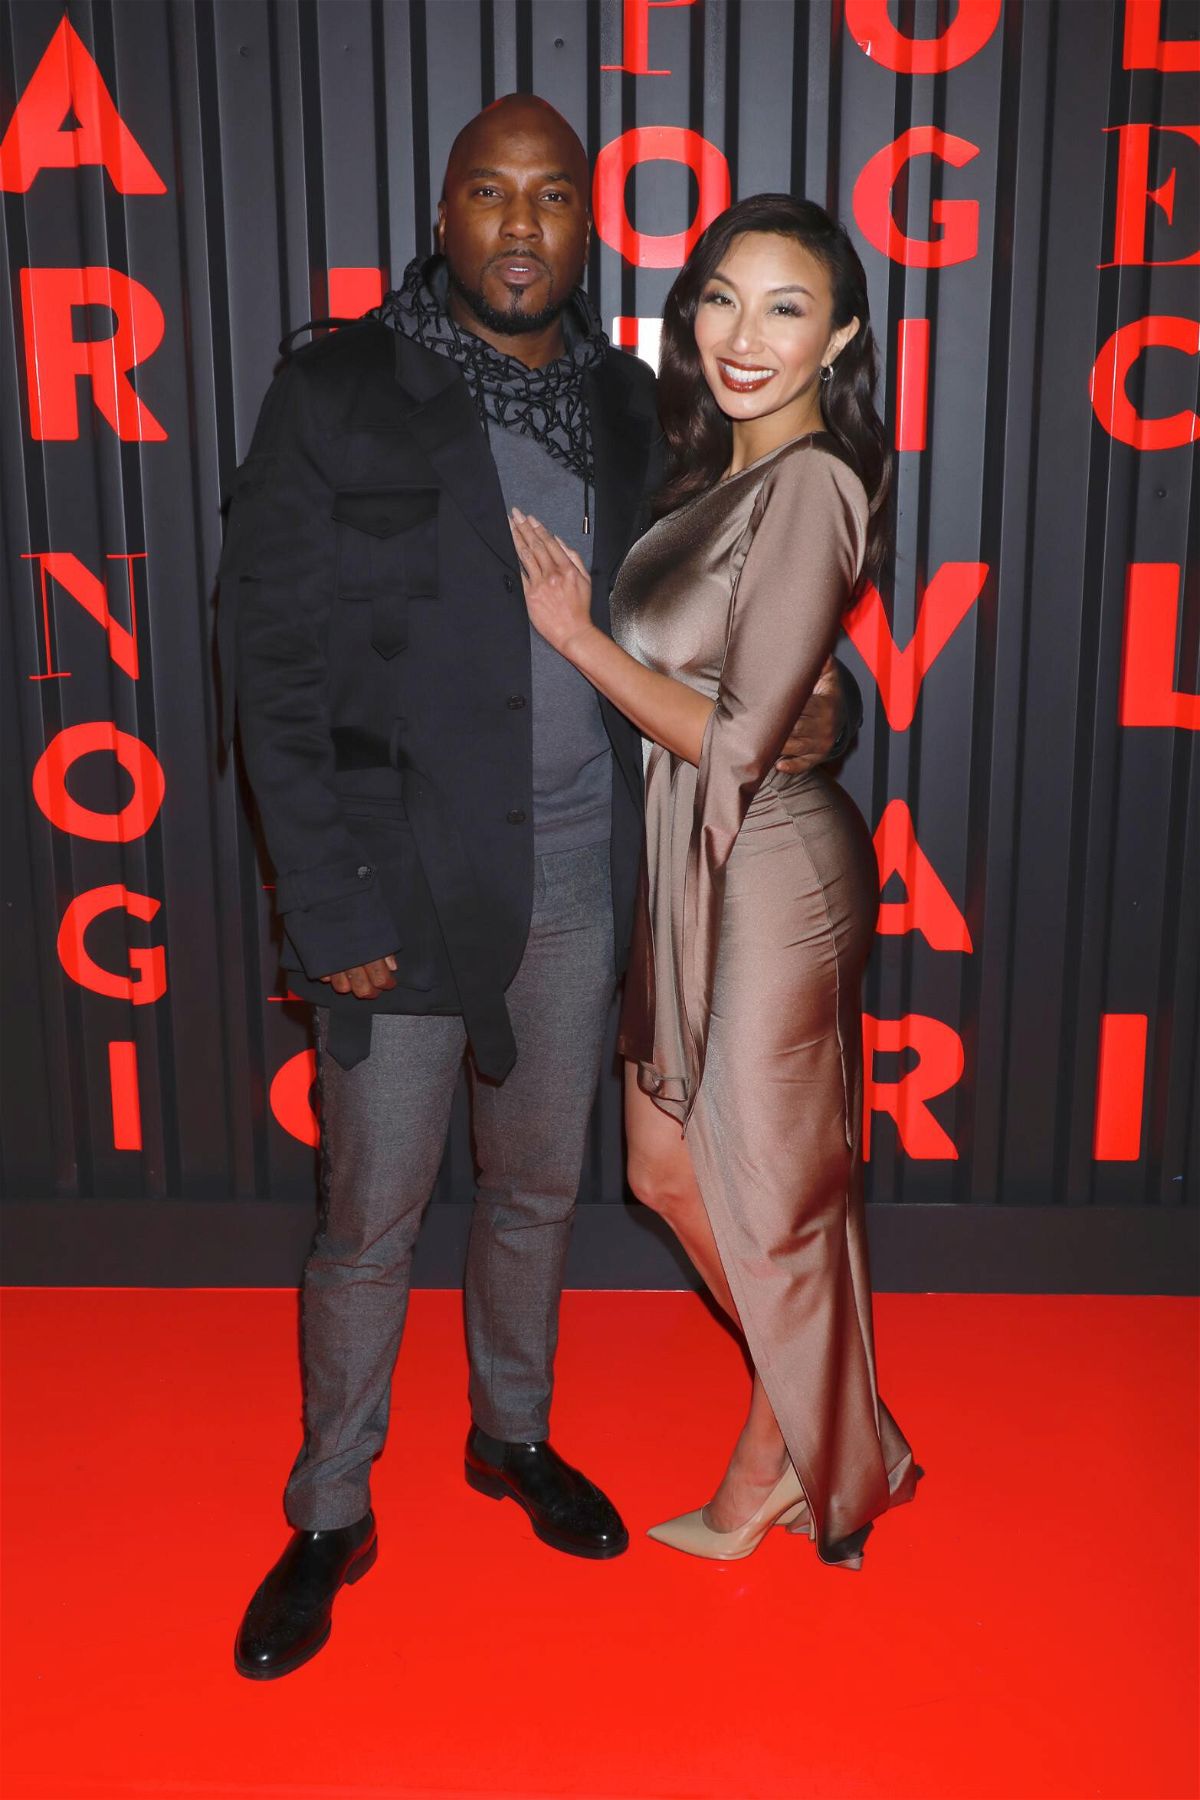 <i>Gregory Pace/Shutterstock</i><br/>Jeezy and Jeannie Mai Jenkins